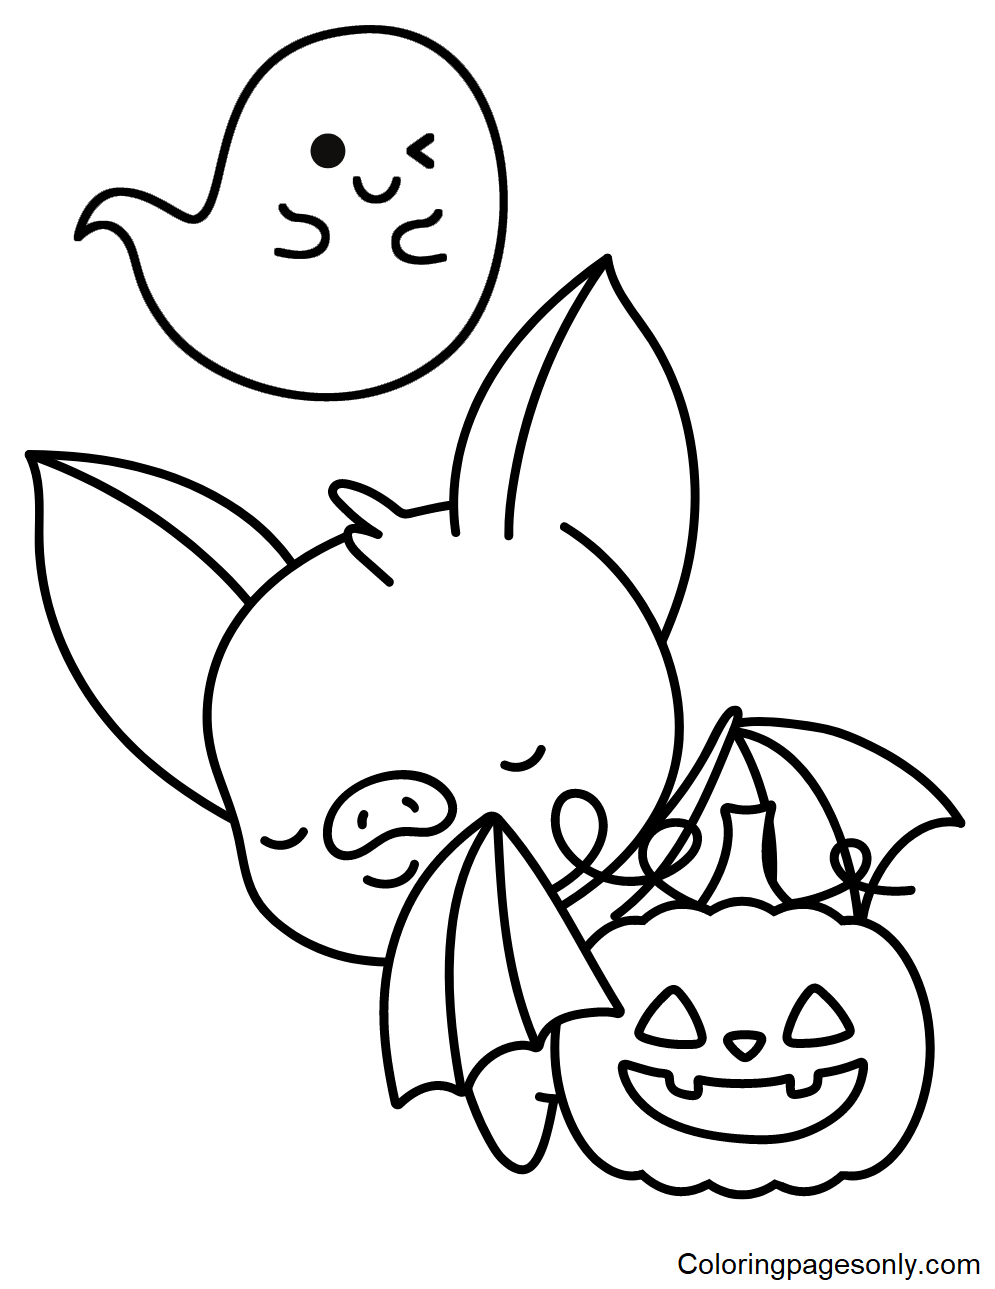 Cute Bat, Ghost, and Pumpkin Coloring Pages